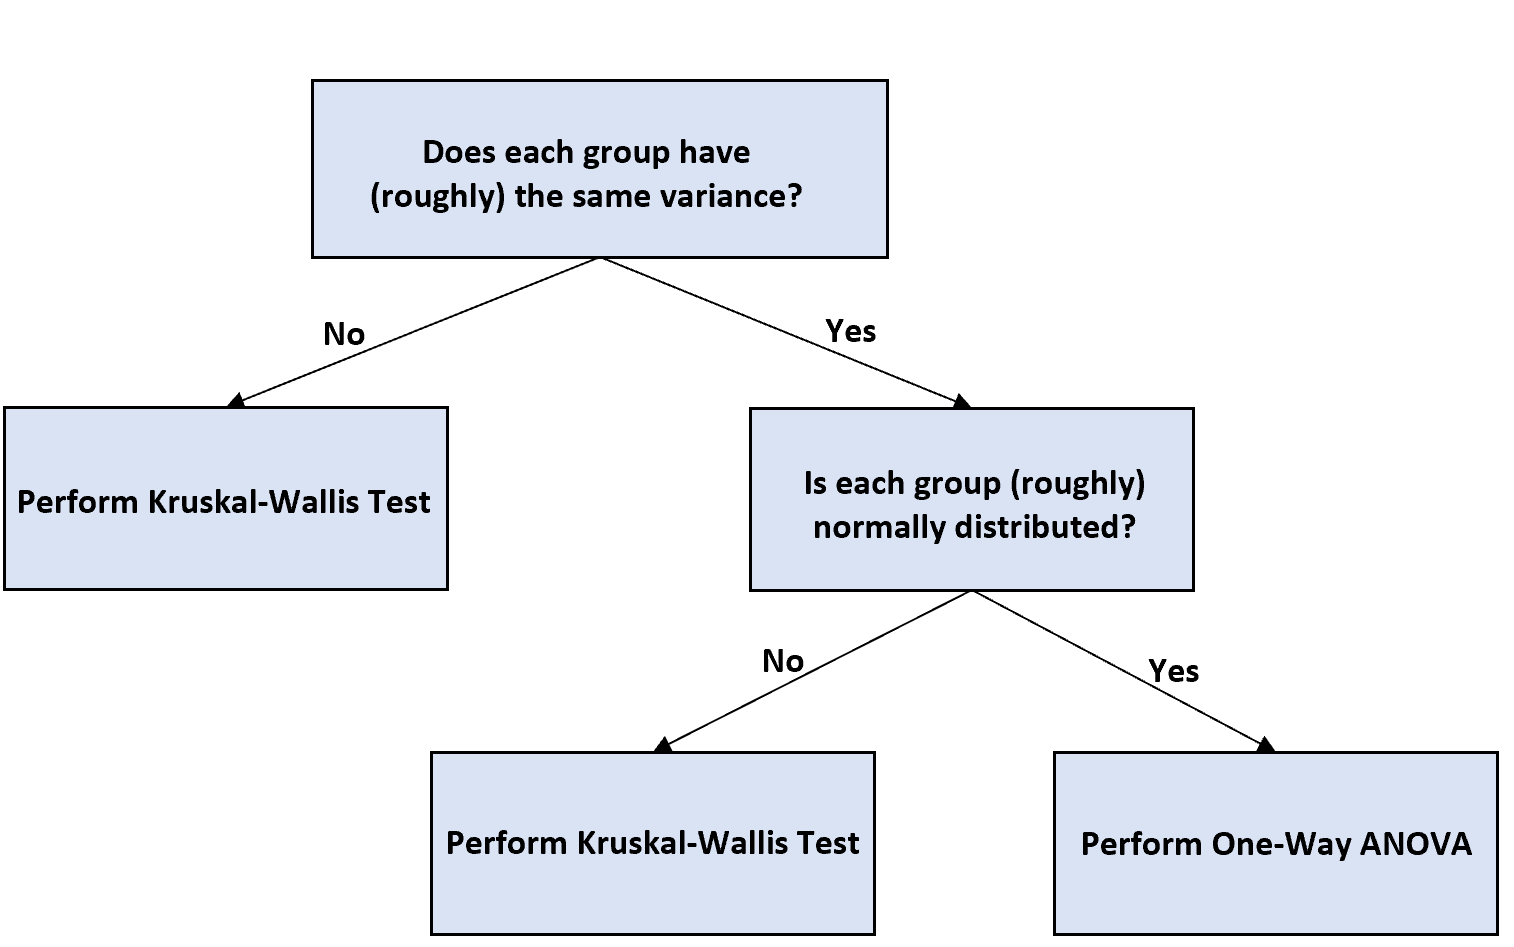 Flow chart for deciding to use one-way ANOVA with unequal sample sizes